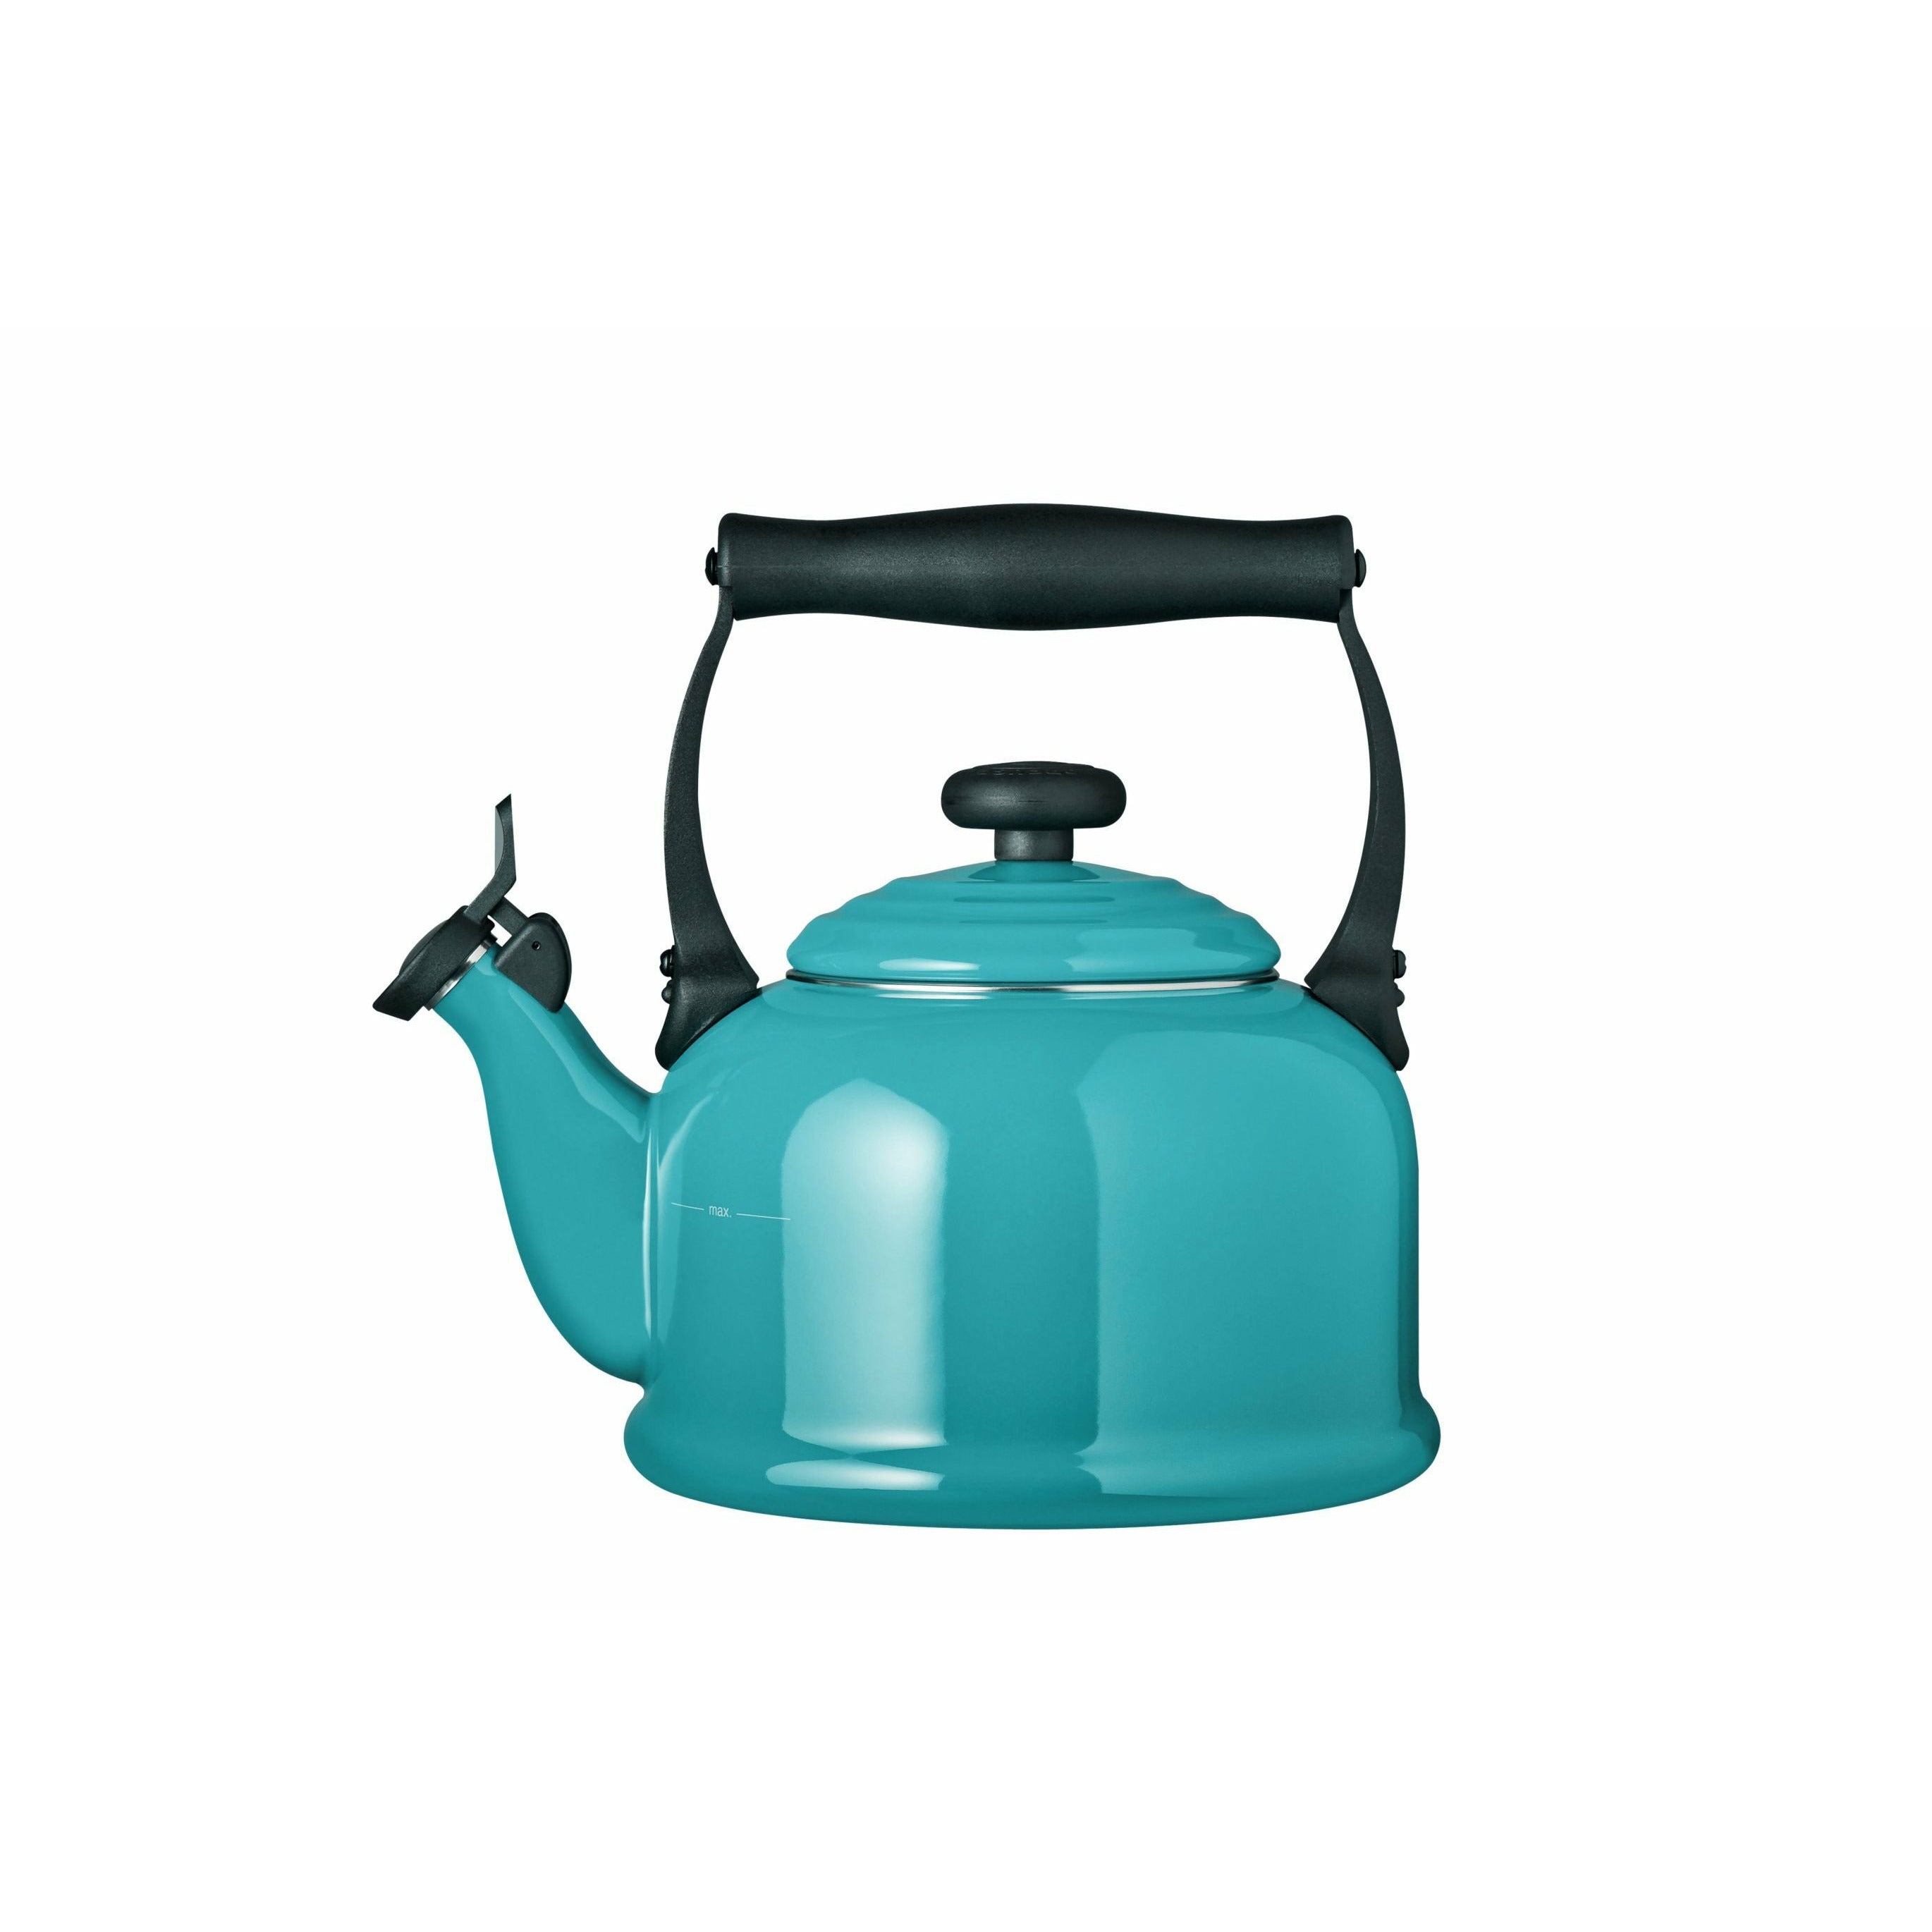 Le Creuset Traditionell Kettle 2.1 L, Caribbean